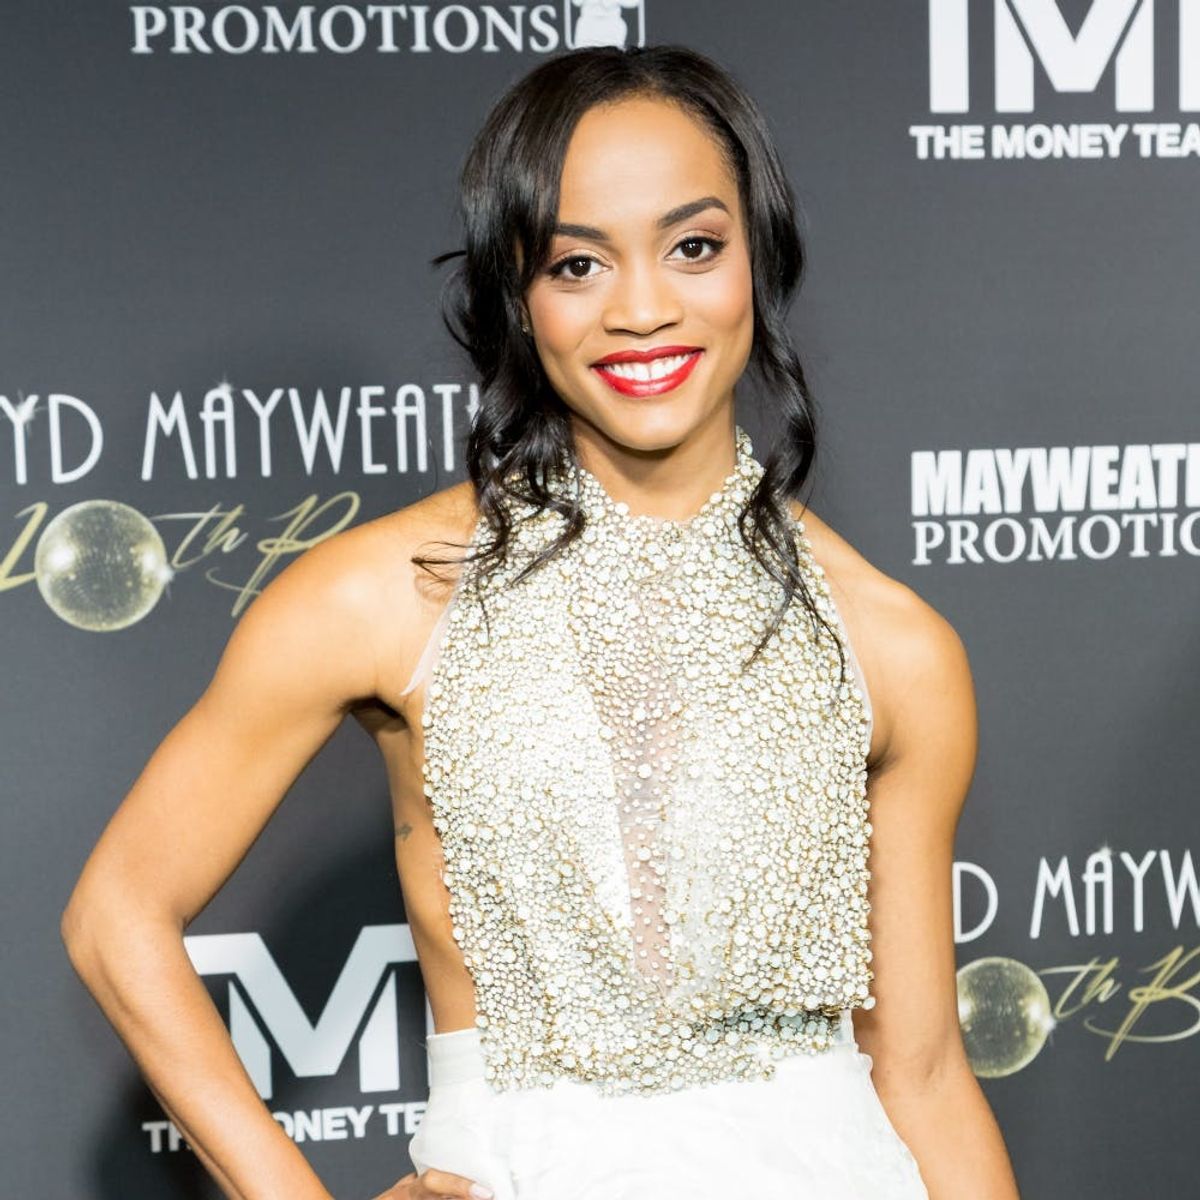 Bachelorette Rachel Lindsay Reveals What She’s Looking for in a Man